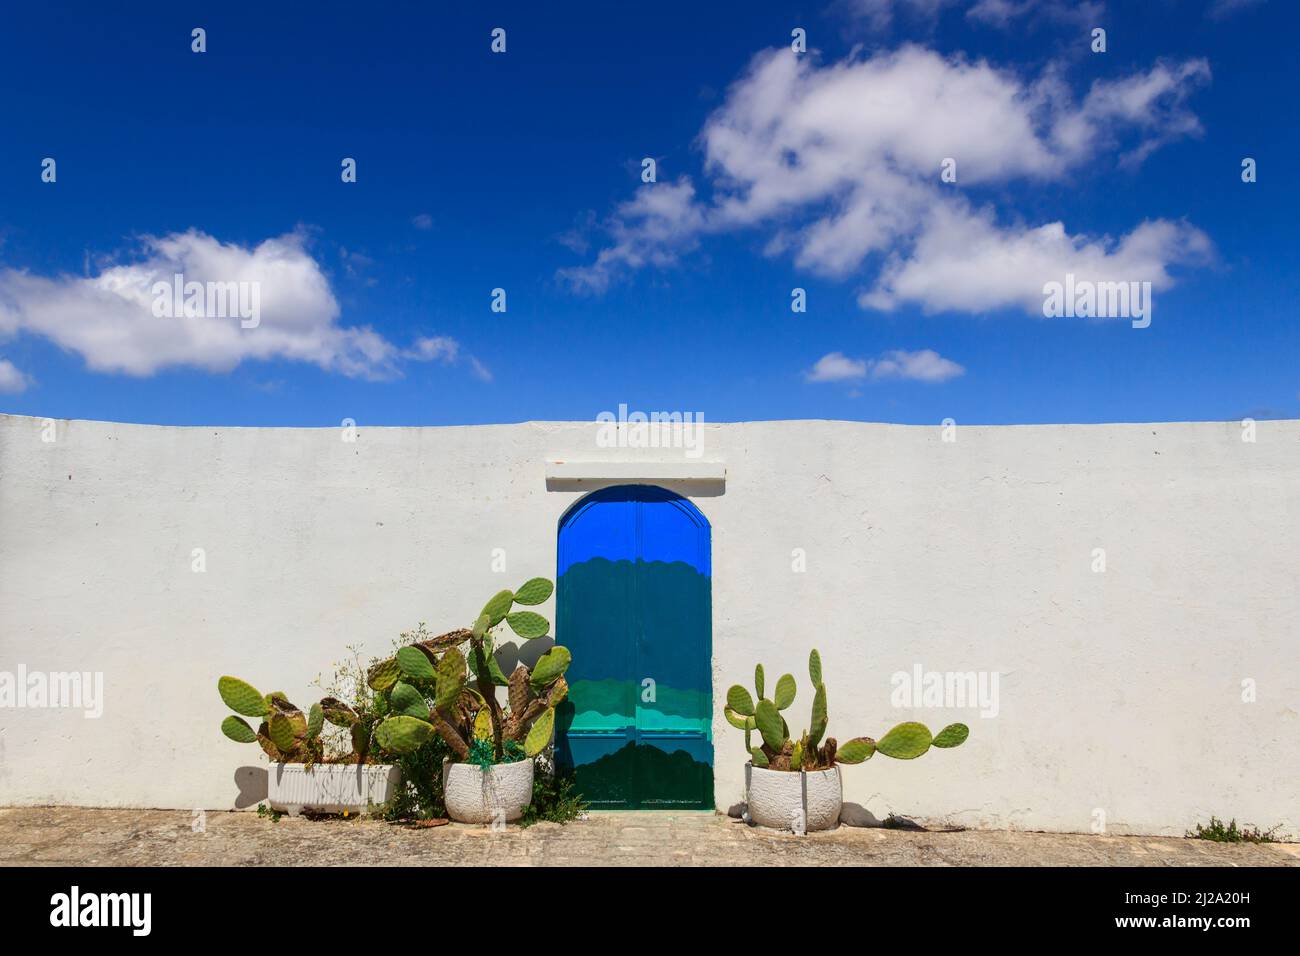 Blue sky with clouds, blue door with prickly pear and the traditional white wall in the town of Ostuni in Apulia, Italy. Stock Photo